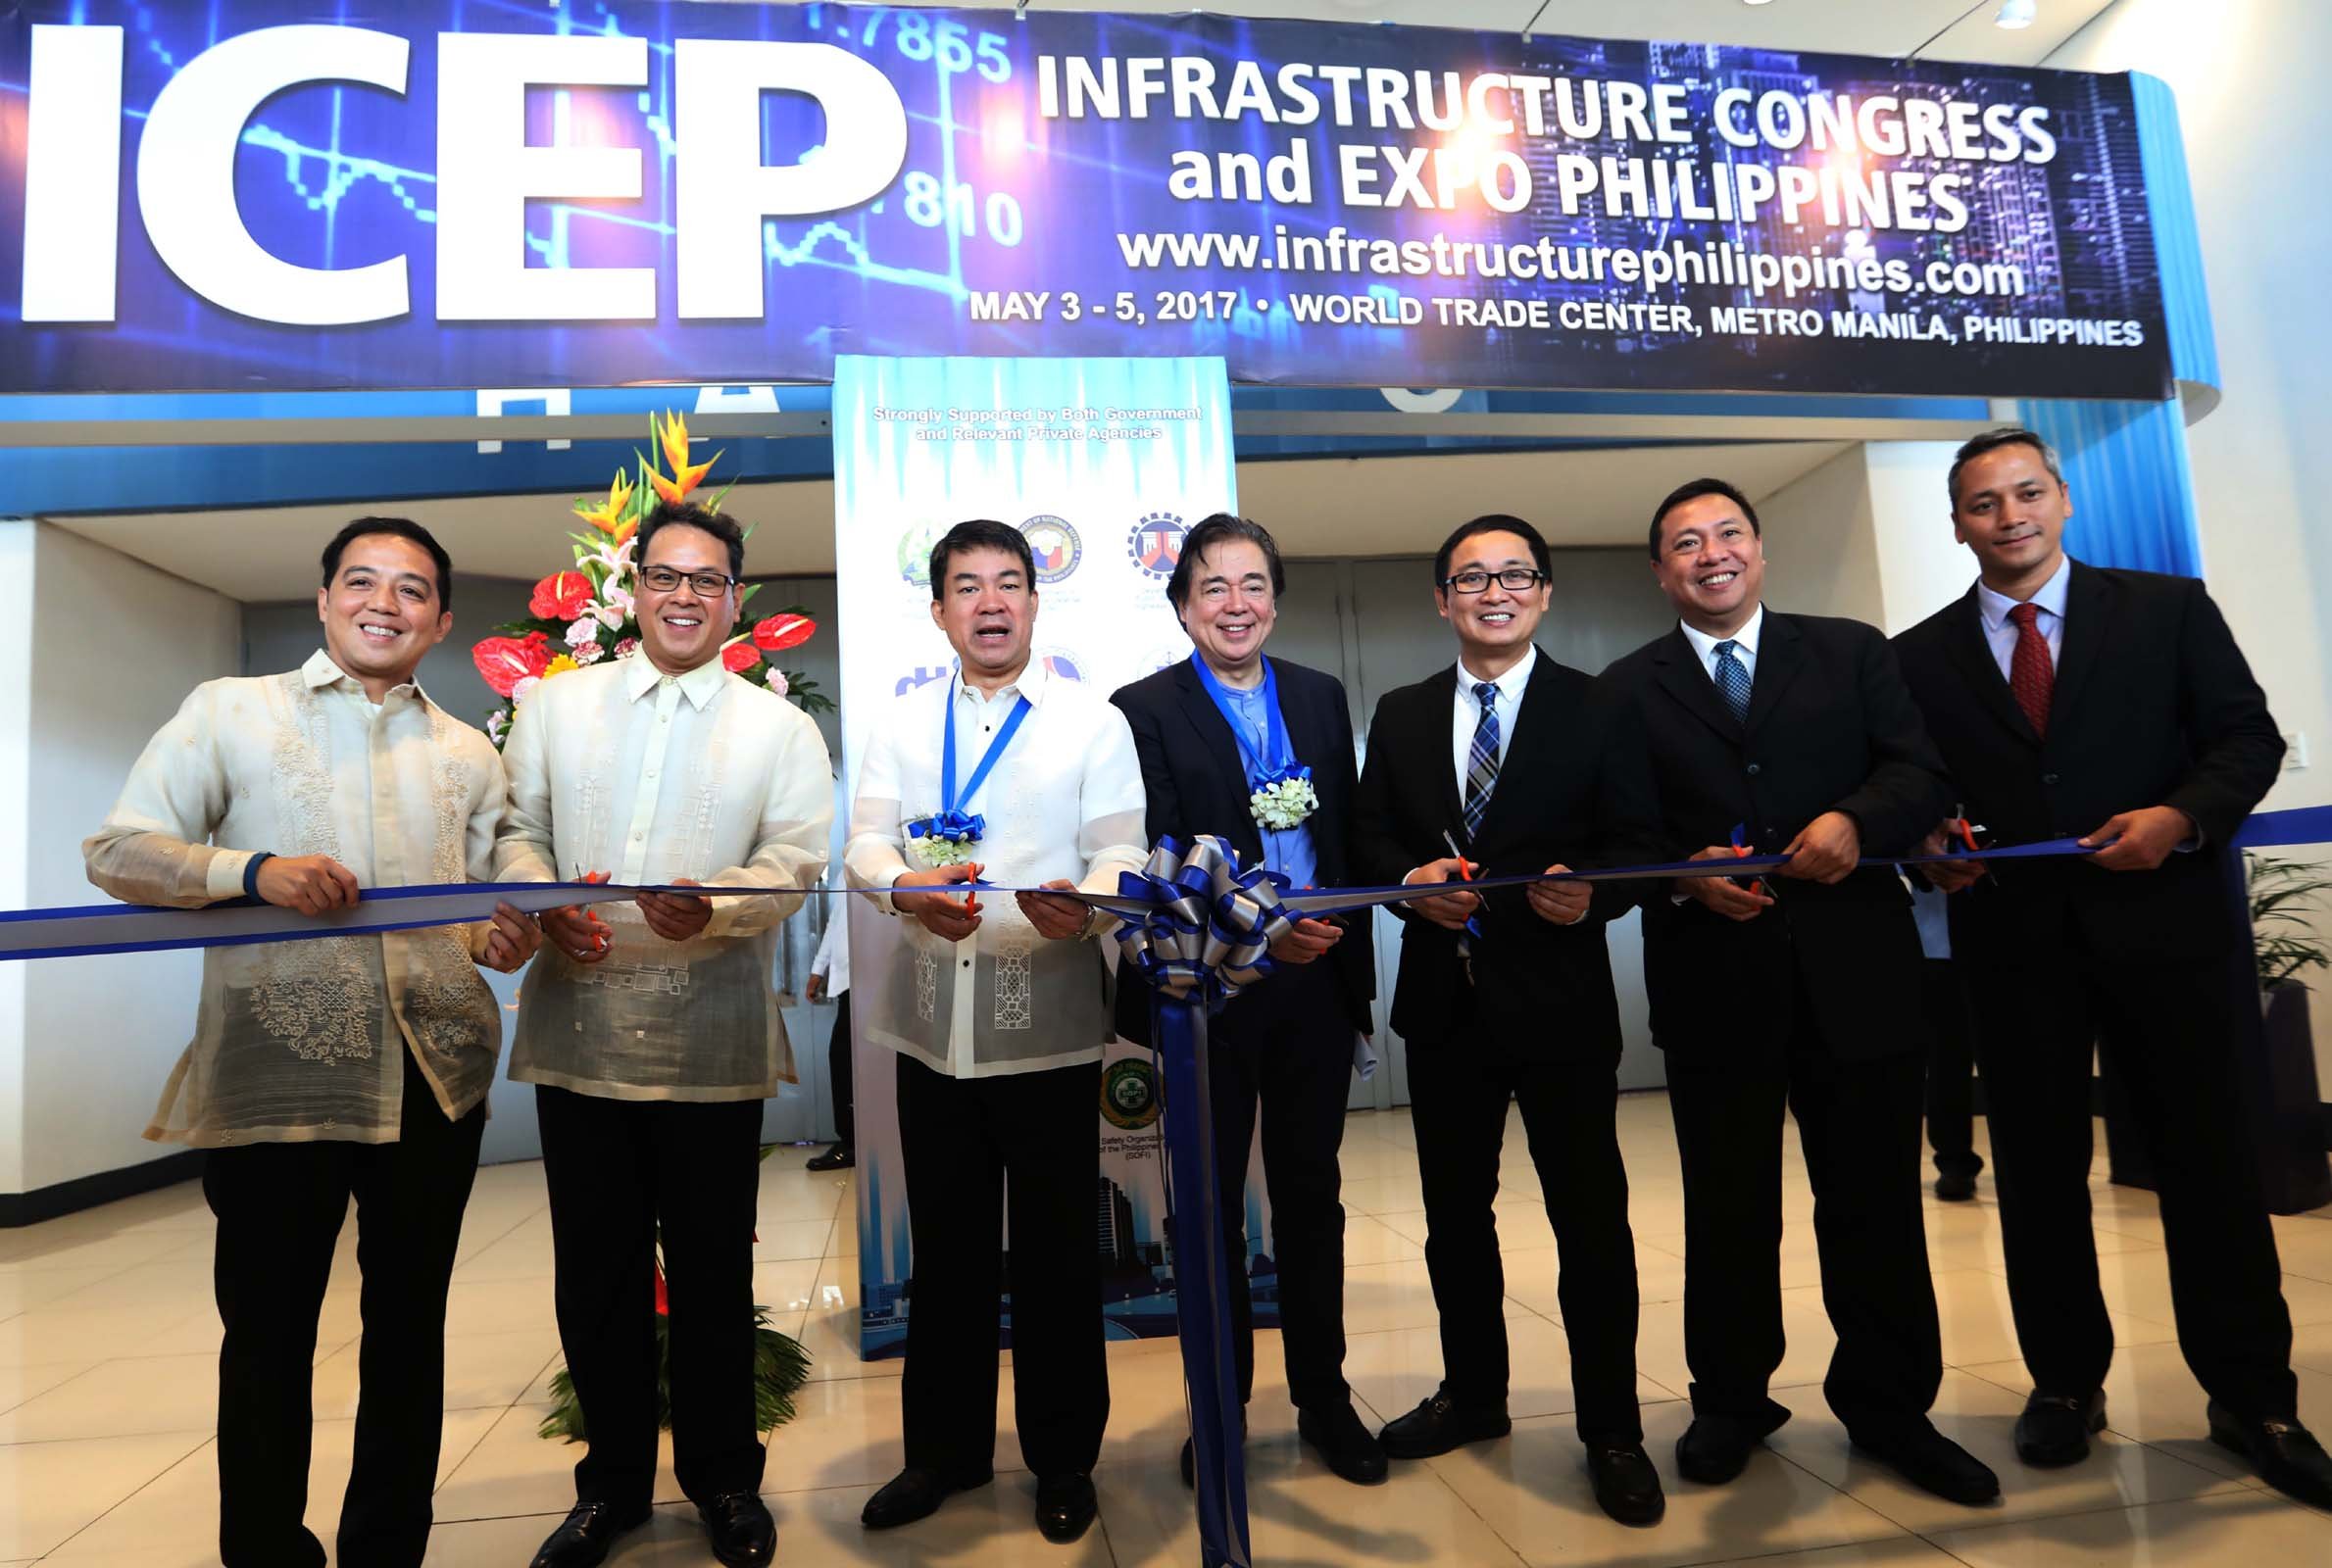 SENATE PRESIDENT AQUILINO PIMENTEL III AT OPENING OF INFRASTRUCTURE CONGRESS AND EXPO PHILIPPINES